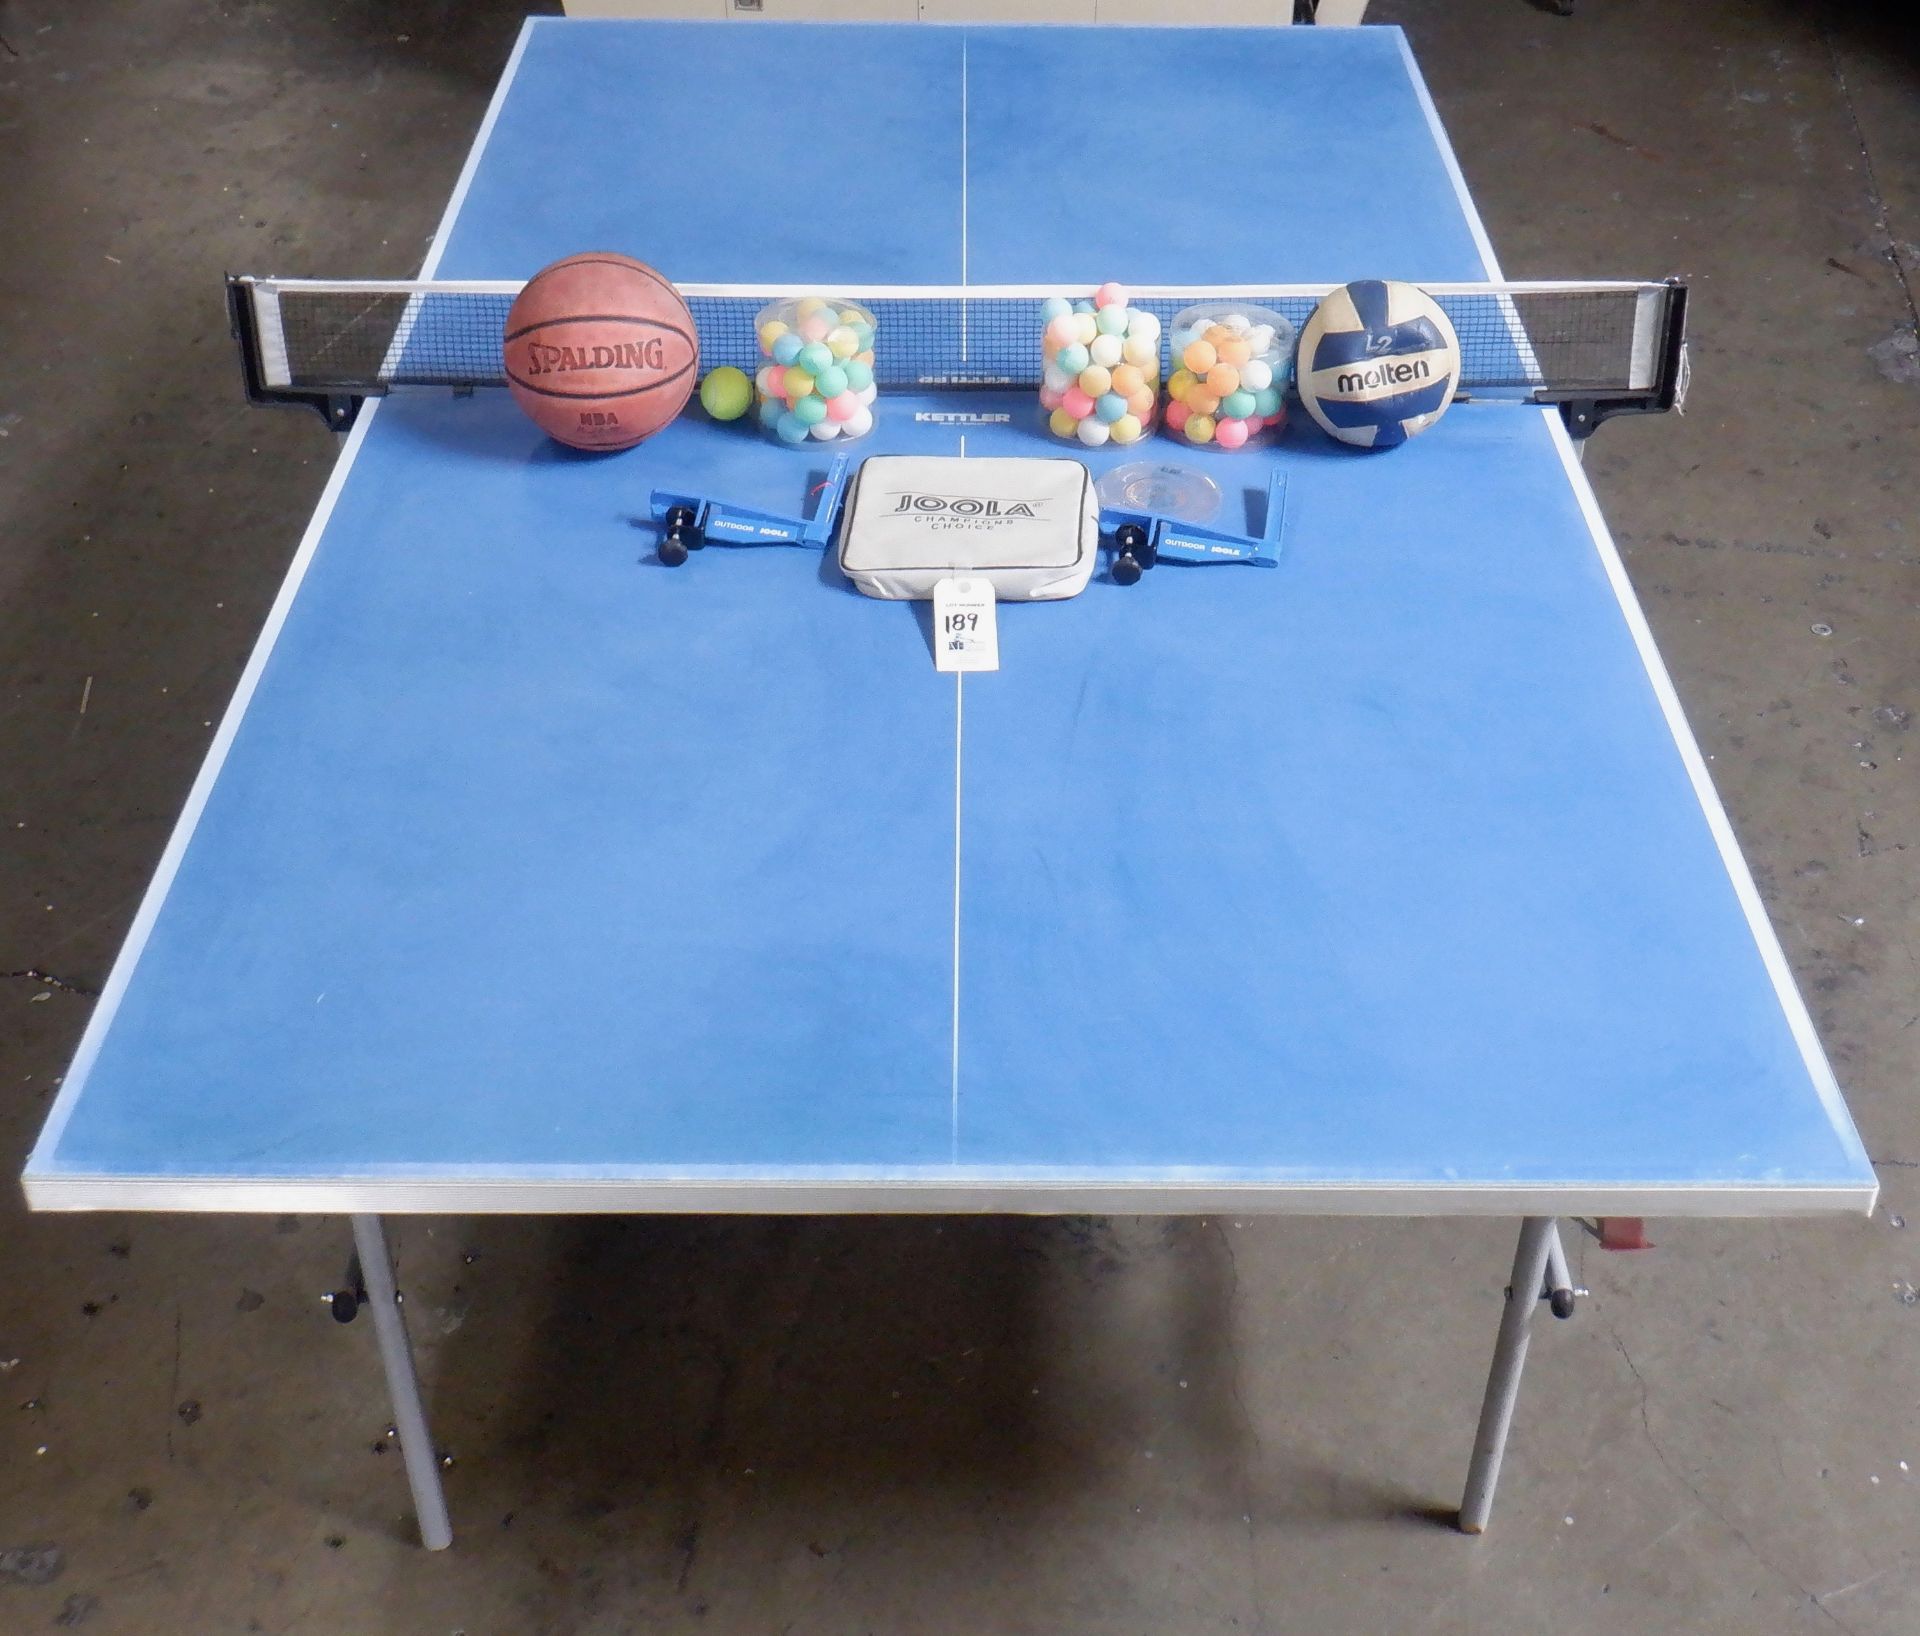 KETTLER OUTDOOR ALUMINUM PING PONG TABLE WITH BALLS - Image 2 of 4